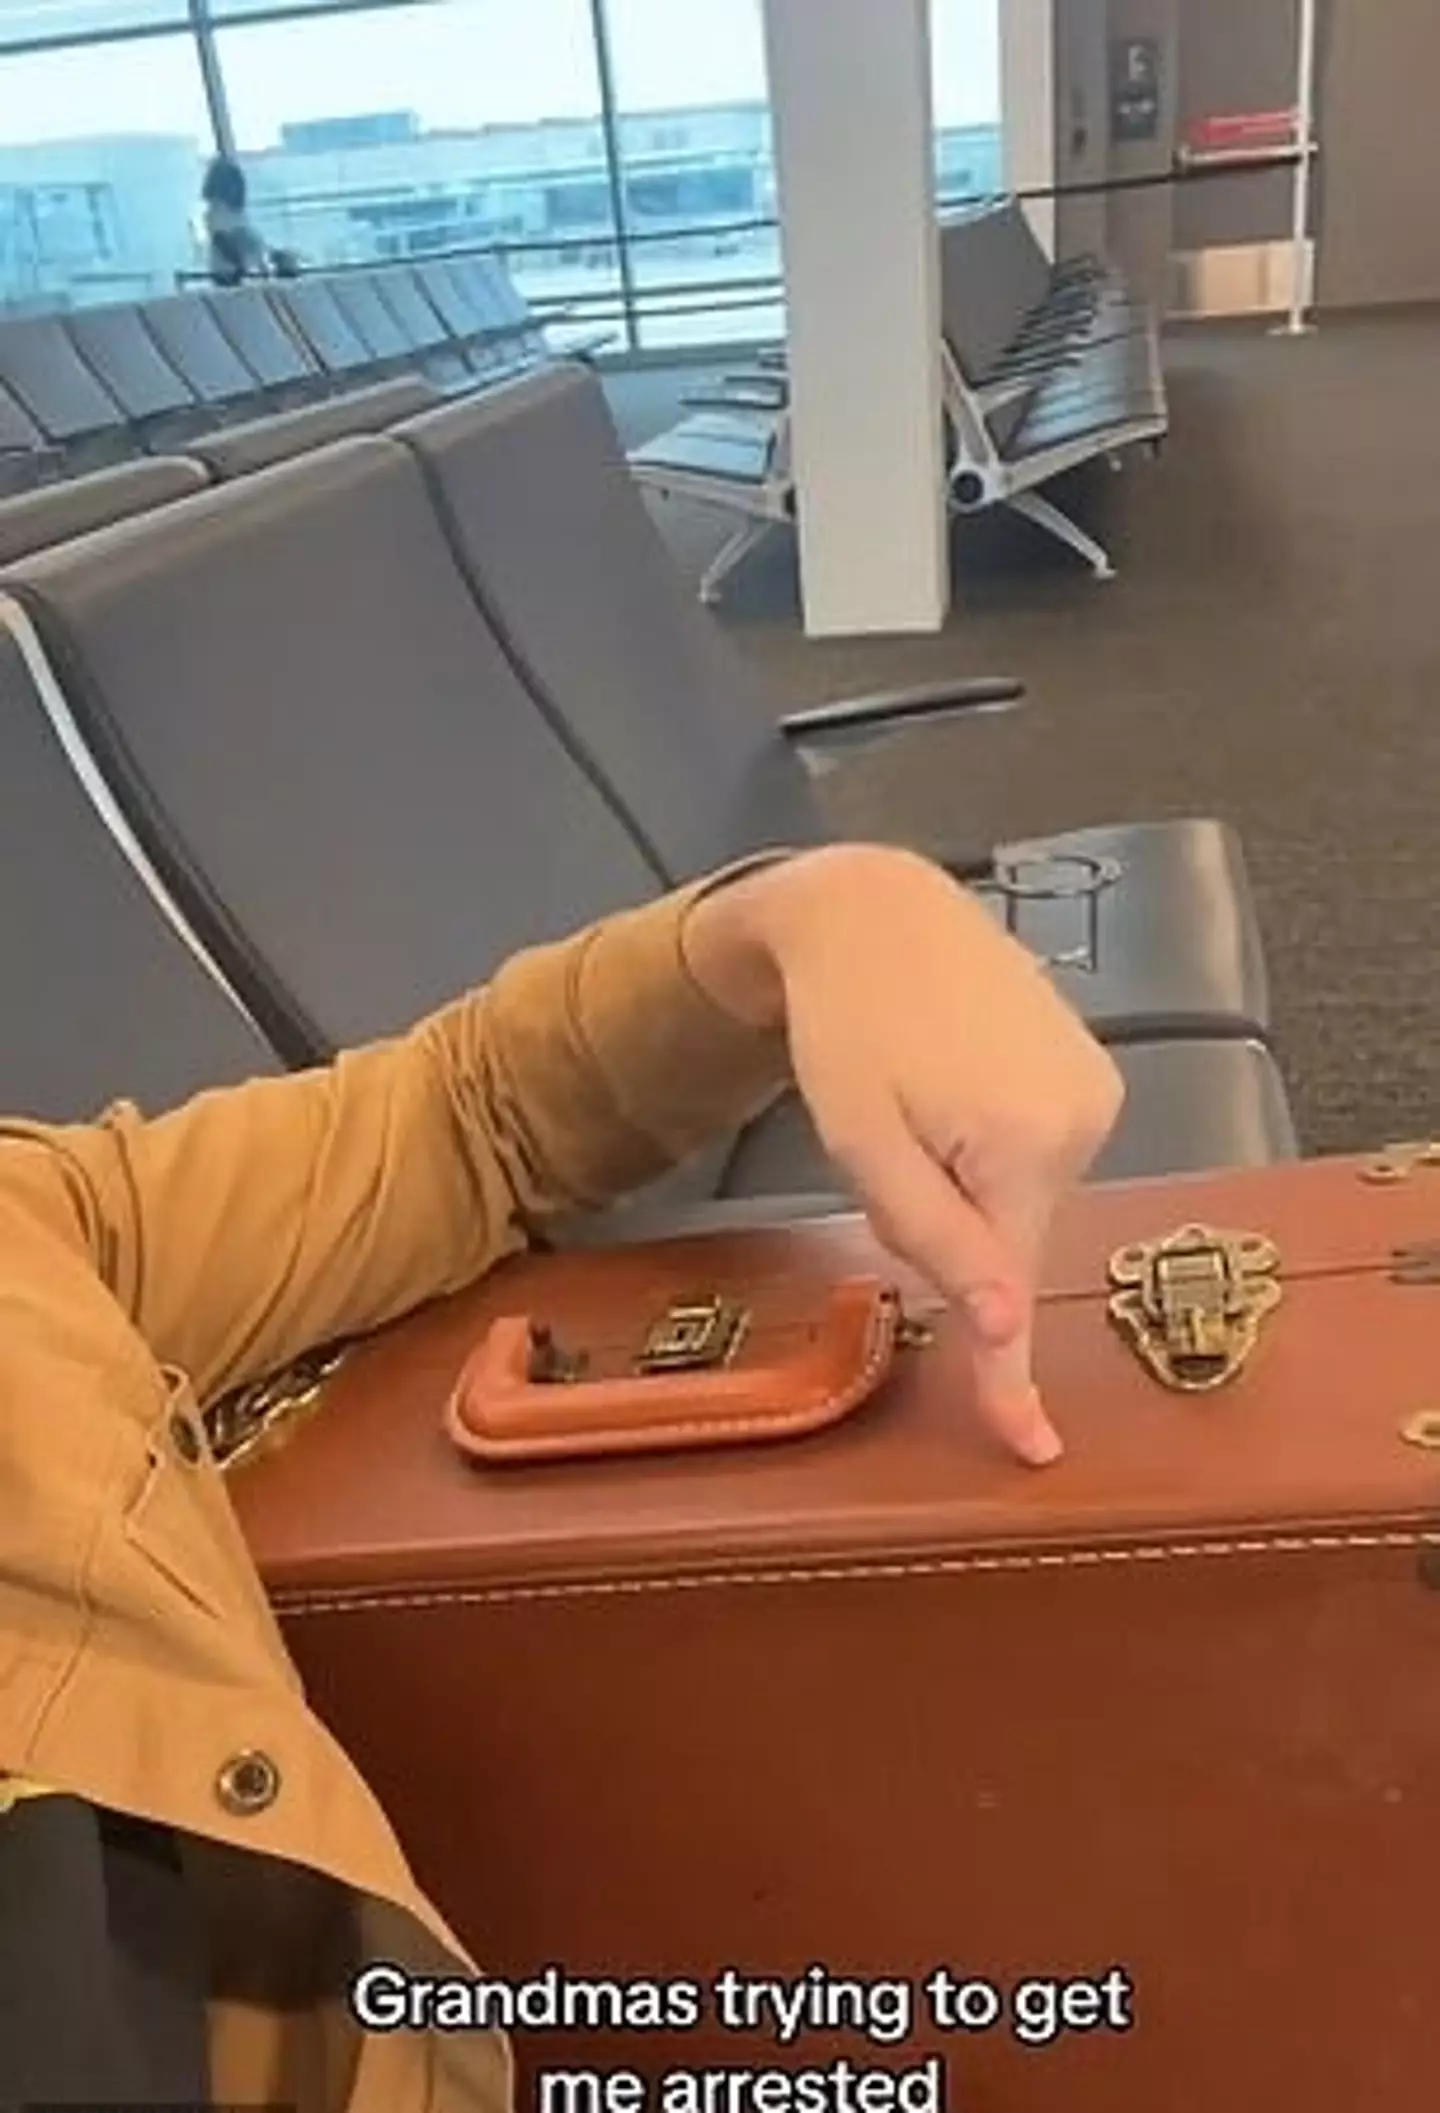 Brent Gaffney - who is an actor based in LA - went viral on TikTok after sharing how his grandma gave him a very heavy briefcase for Thanksgiving.